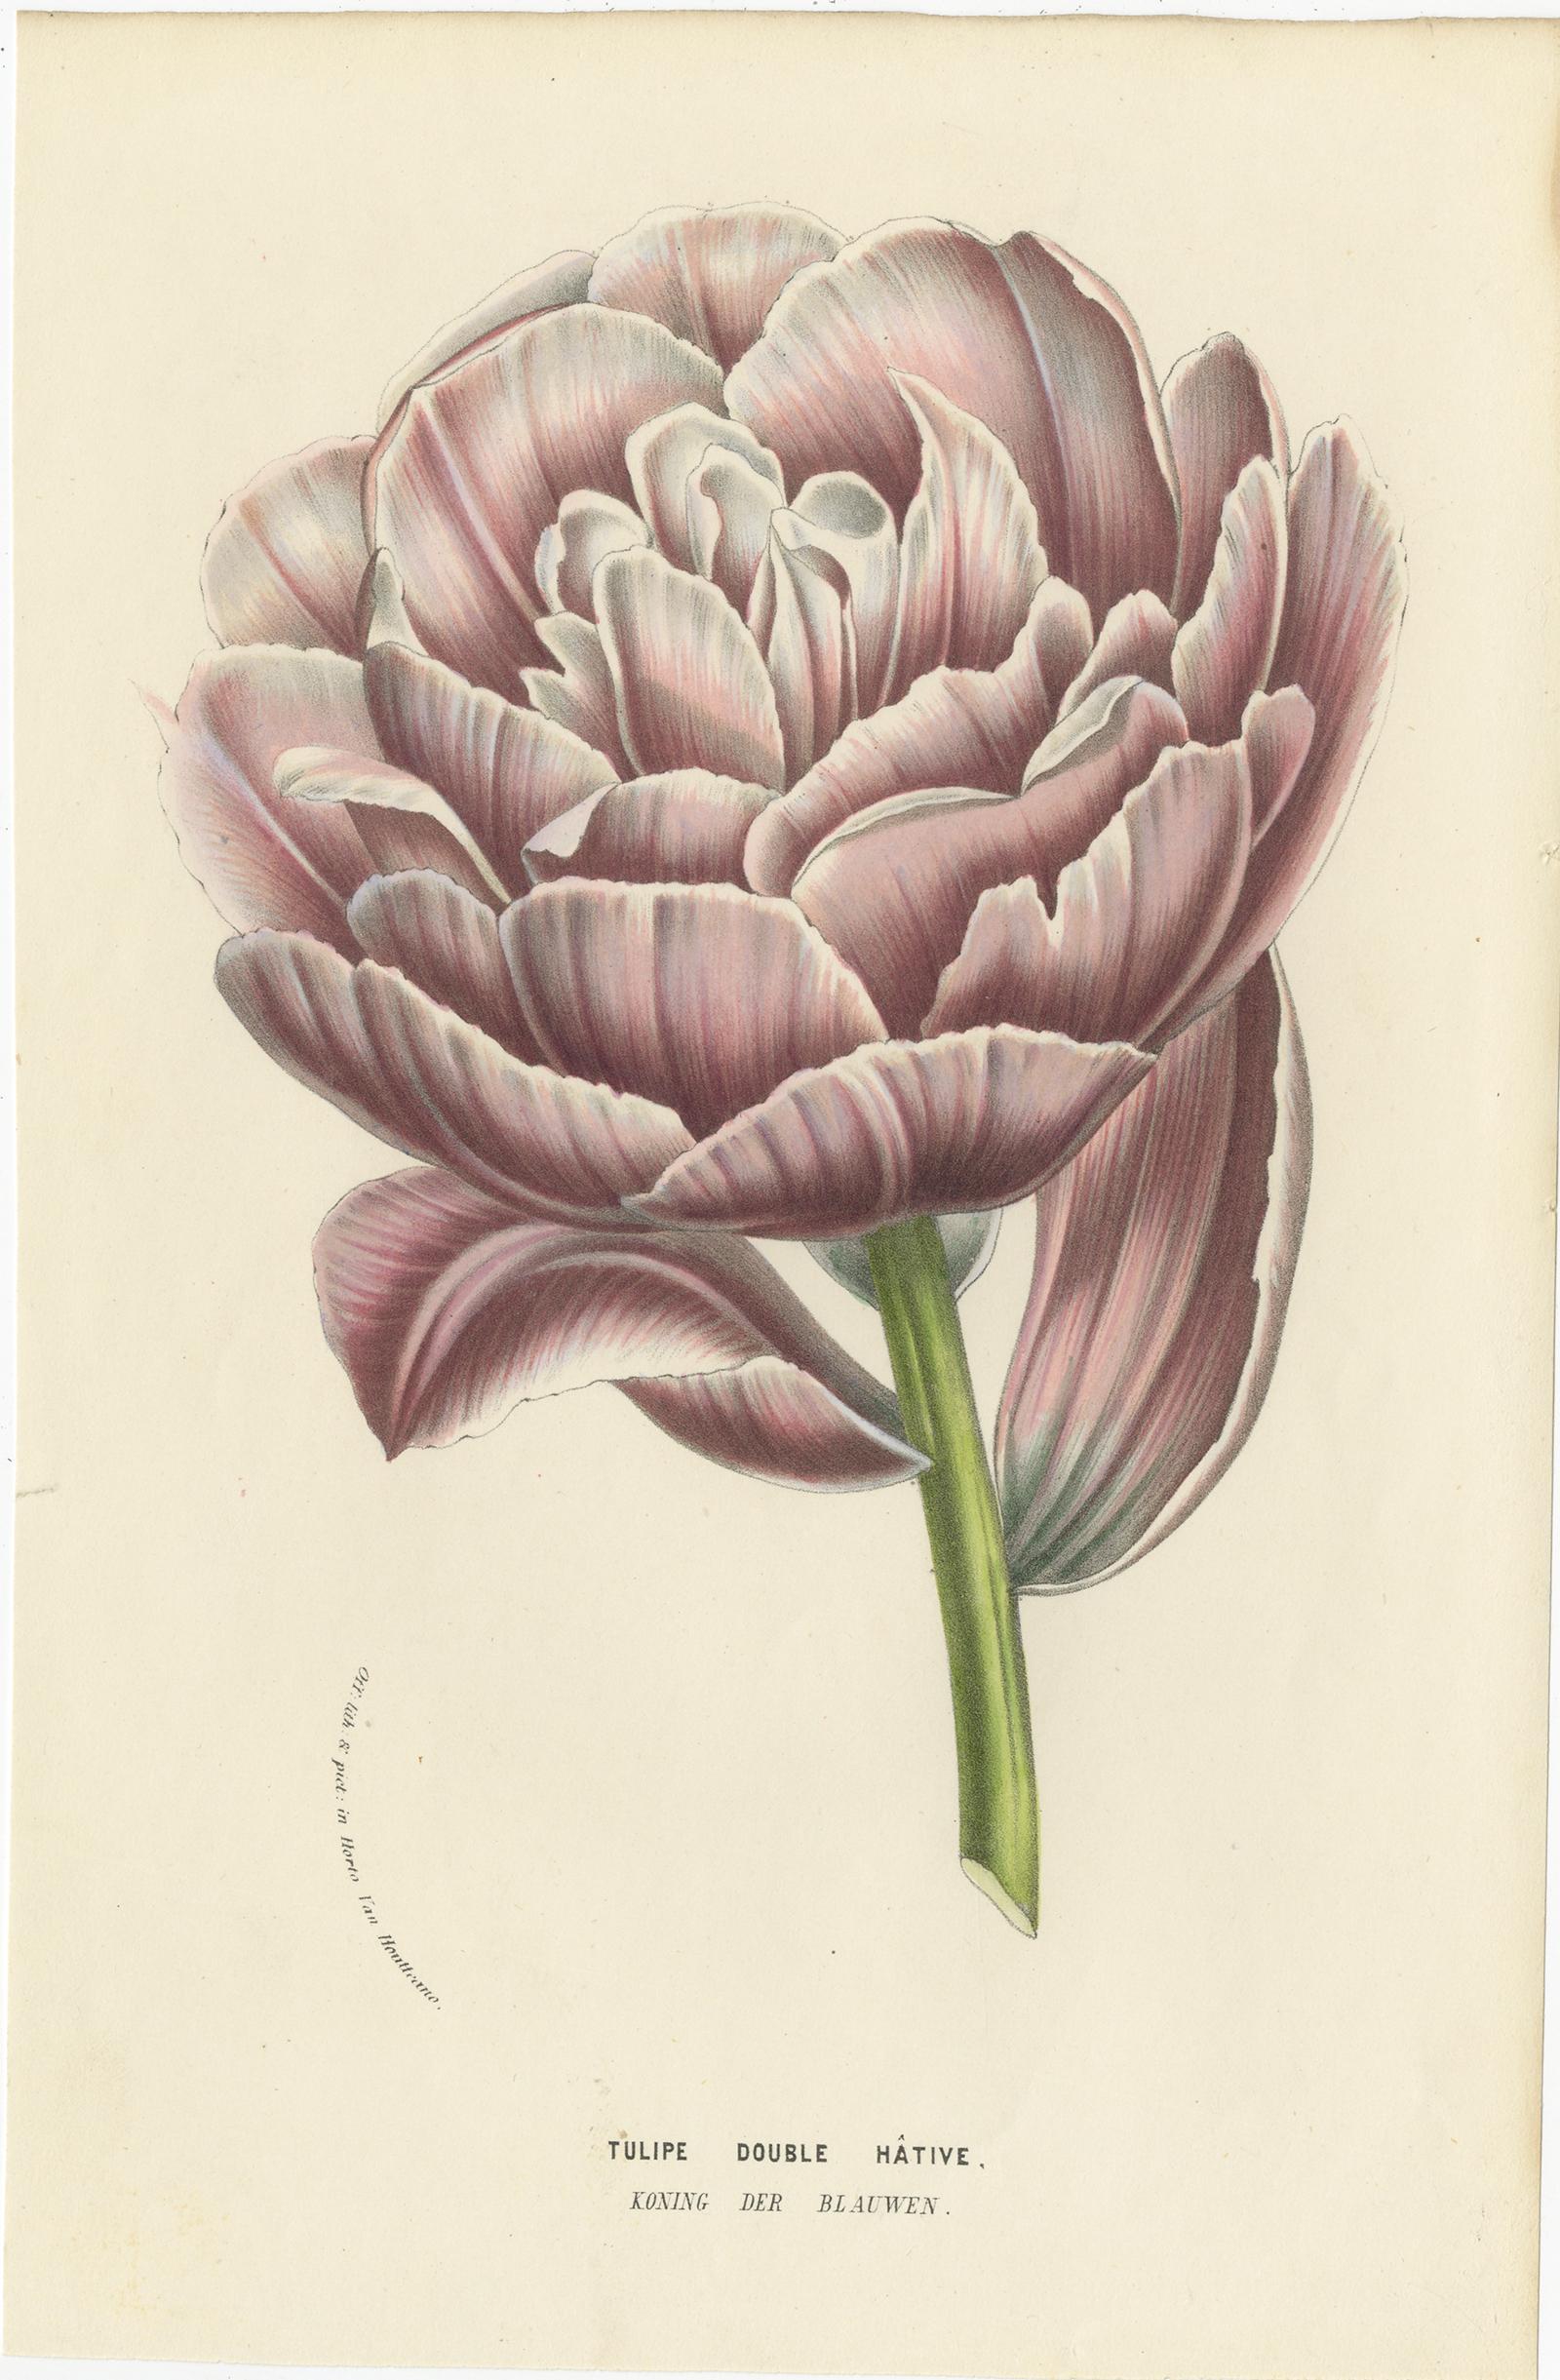 Set of Two antique botany prints titled 'Tulipe double Hative - Tulipe double Hative'. Lithographs of various tulips (tulips). These prints originate from volume 12 of 'Flore des Serres' by Louis van Houtte. Published in 1857.